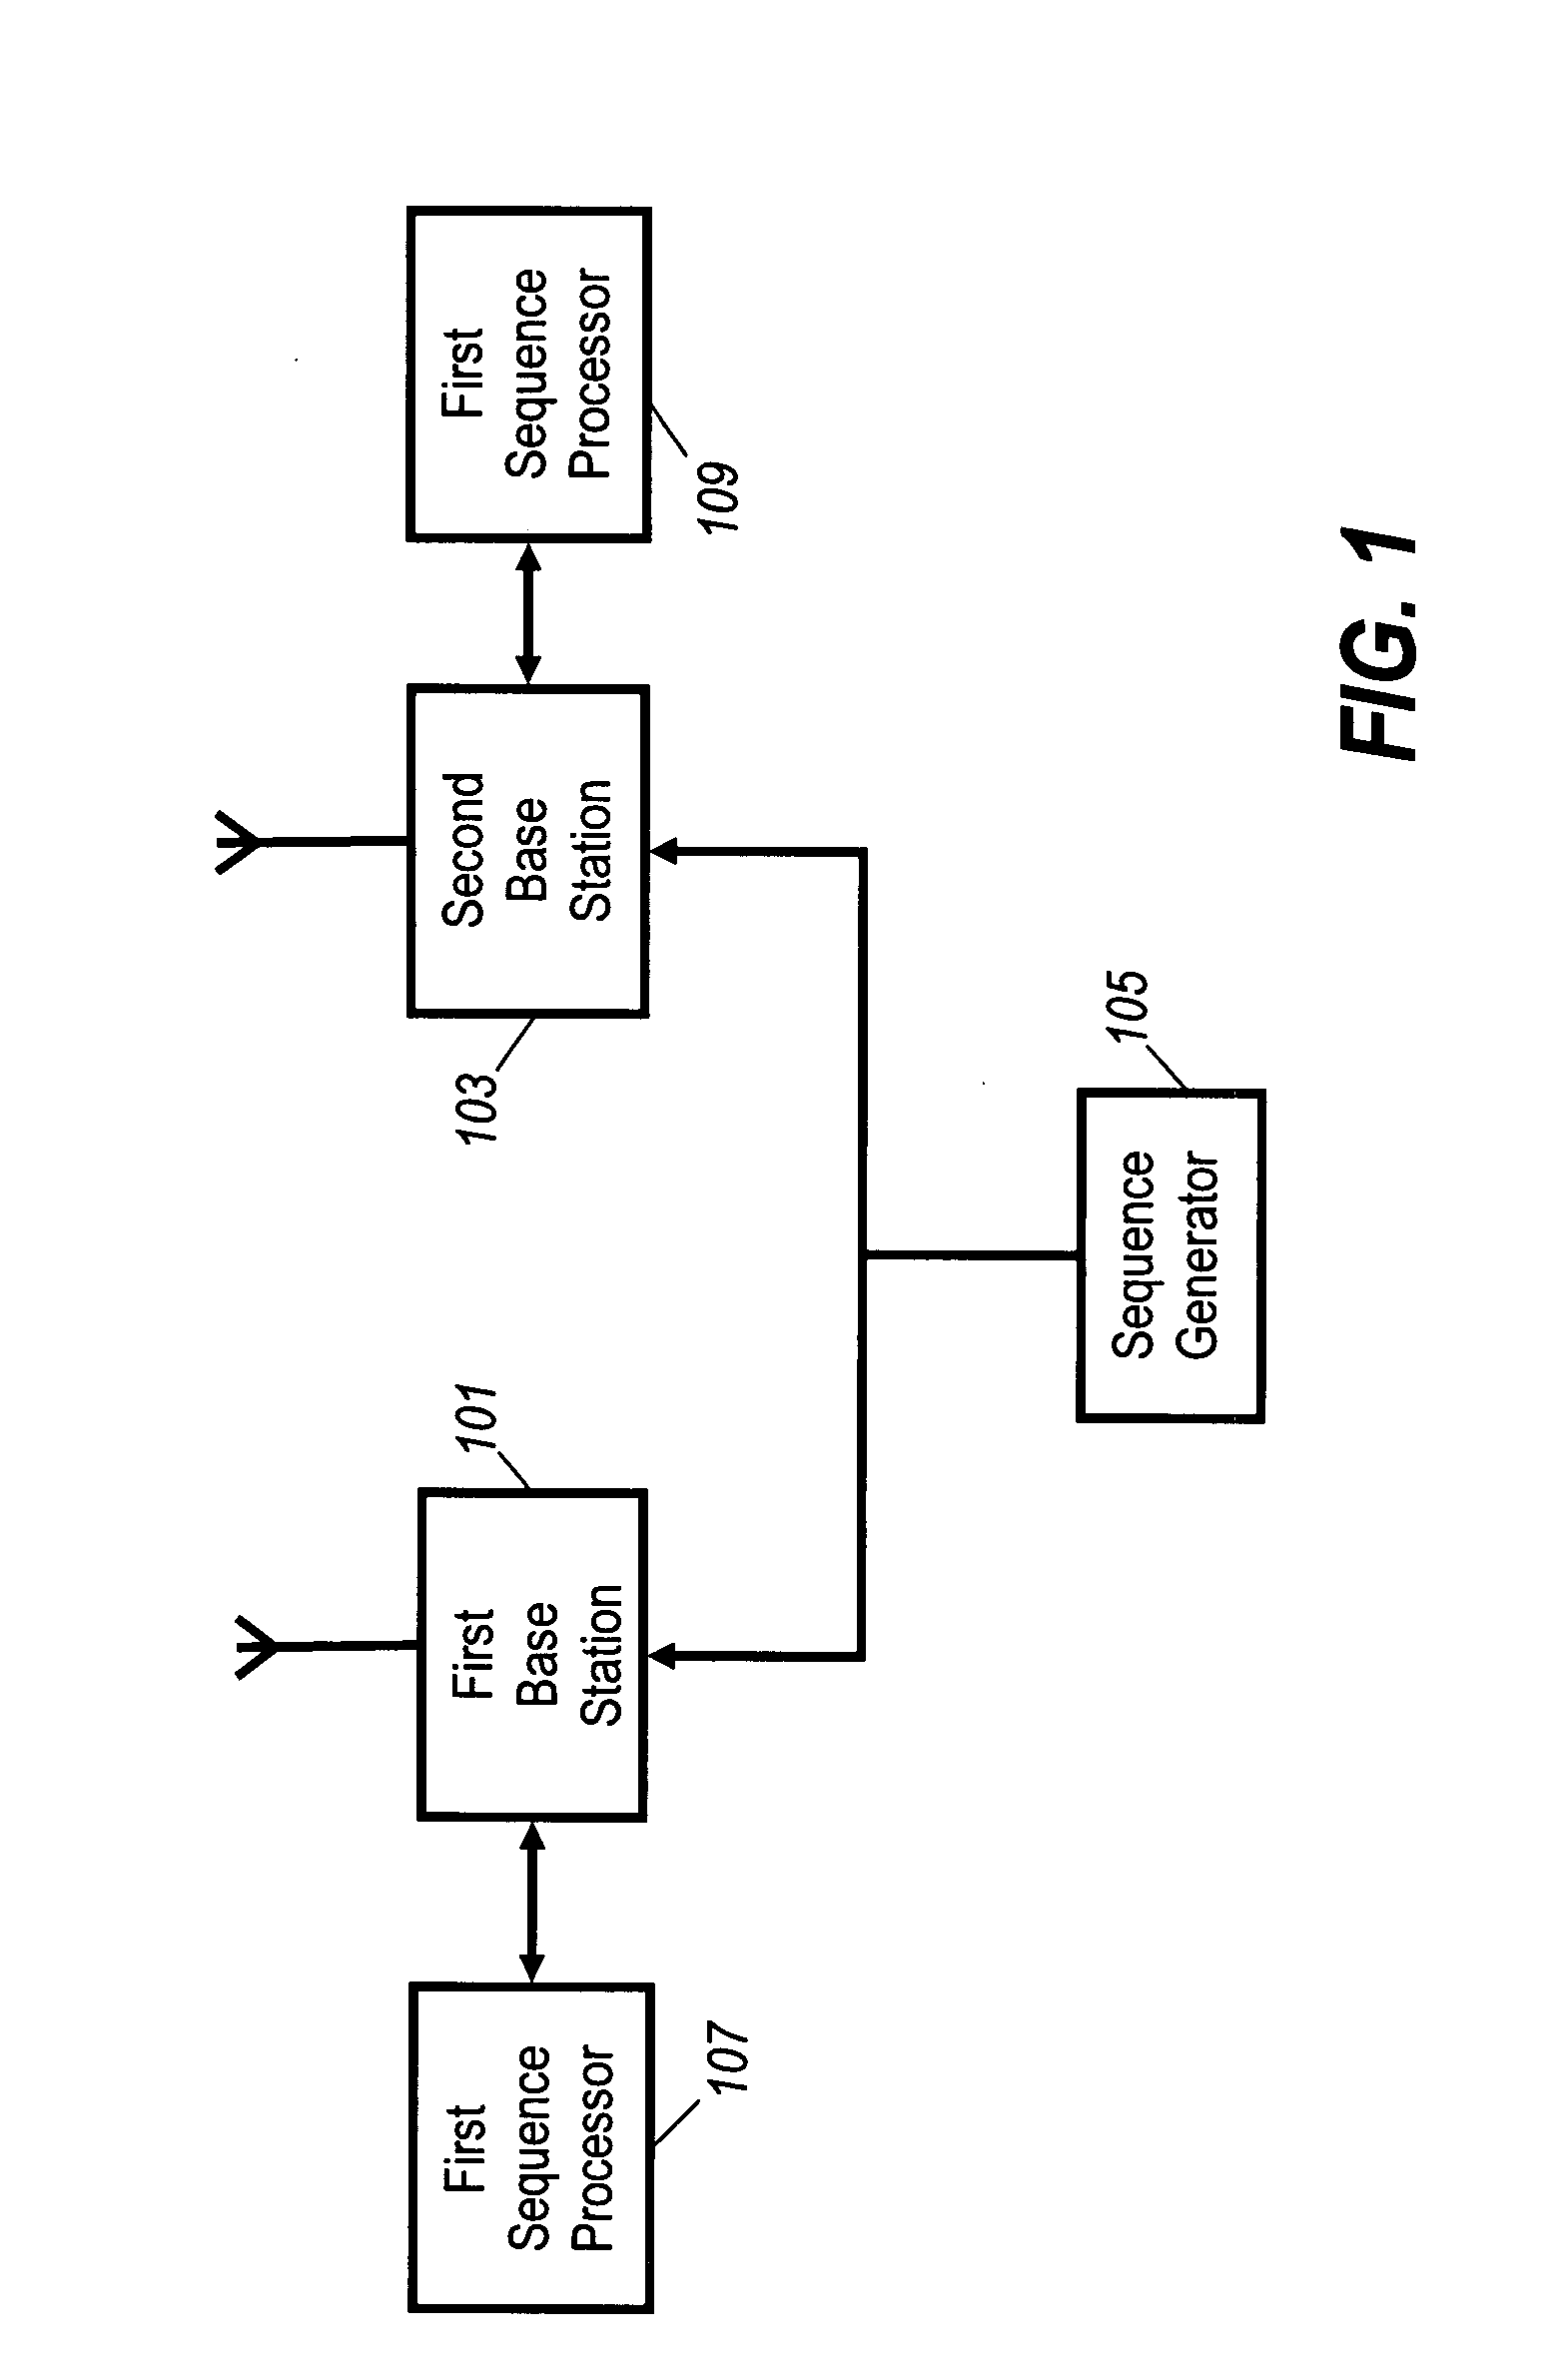 Cellular communication system and a method of operation therefor